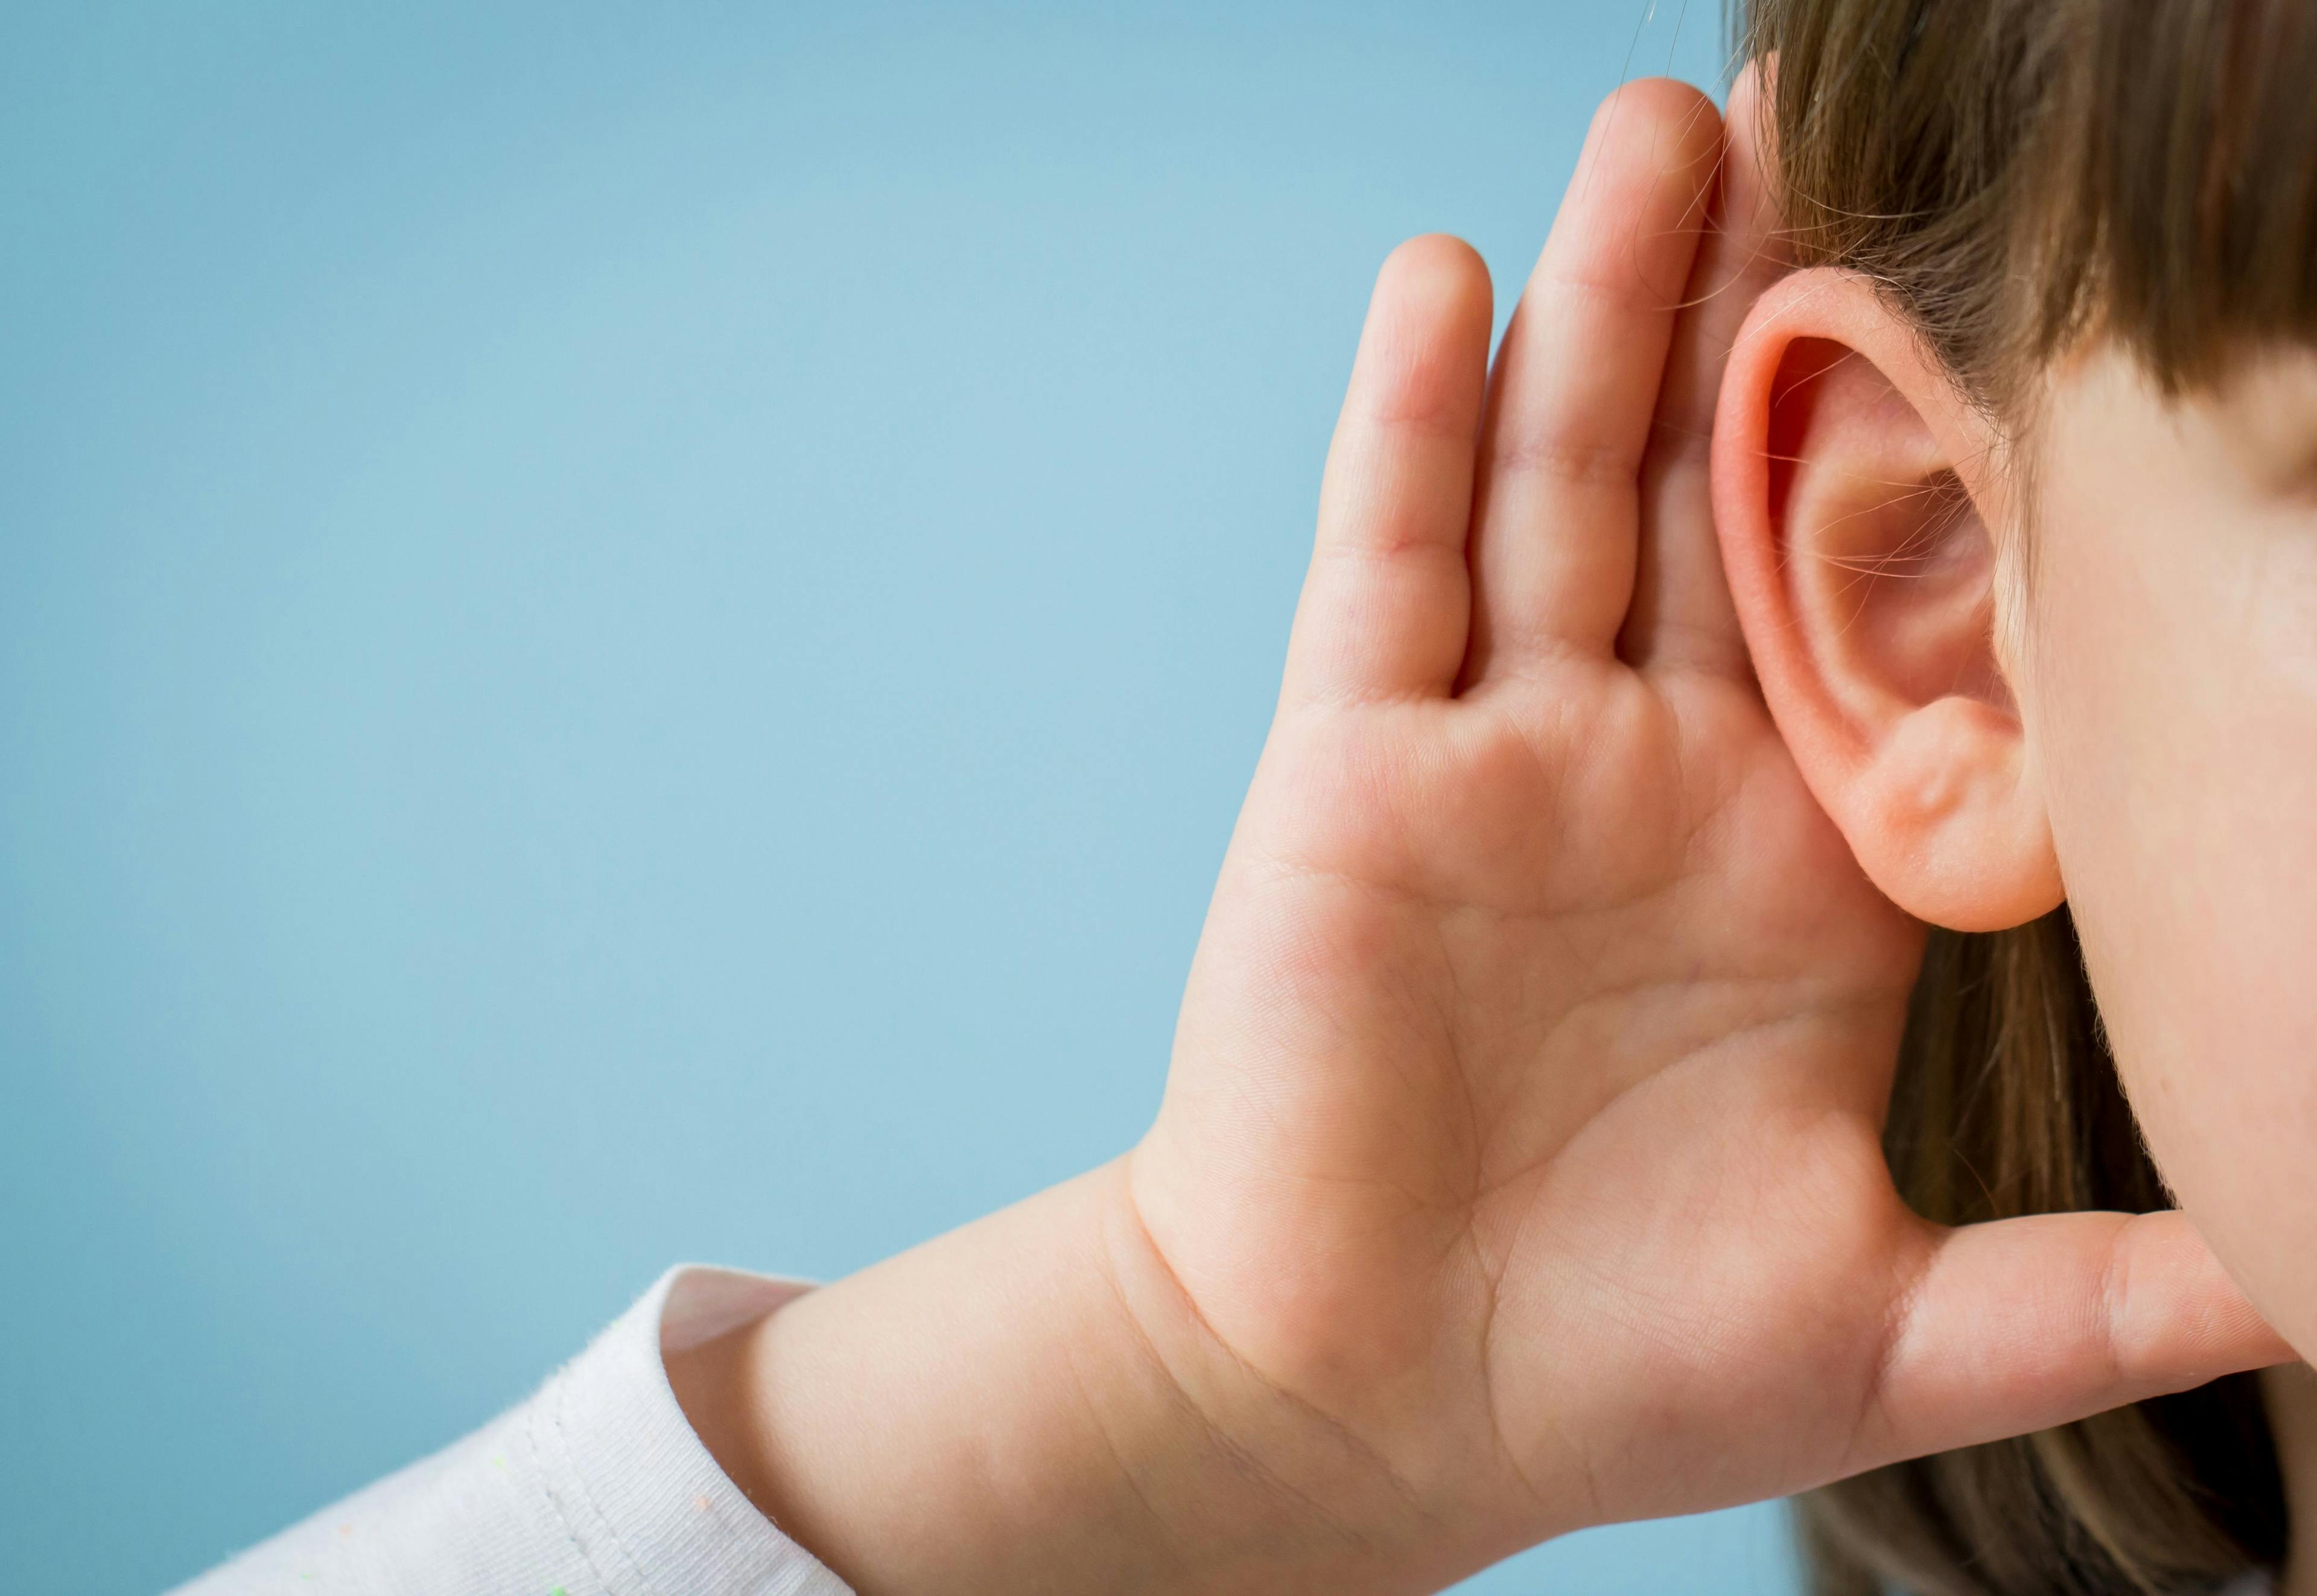 Hearing loss prevalence high in children, adults with sickle cell disease | Image Credit: © Marija - © Marija - stock.adobe.com.